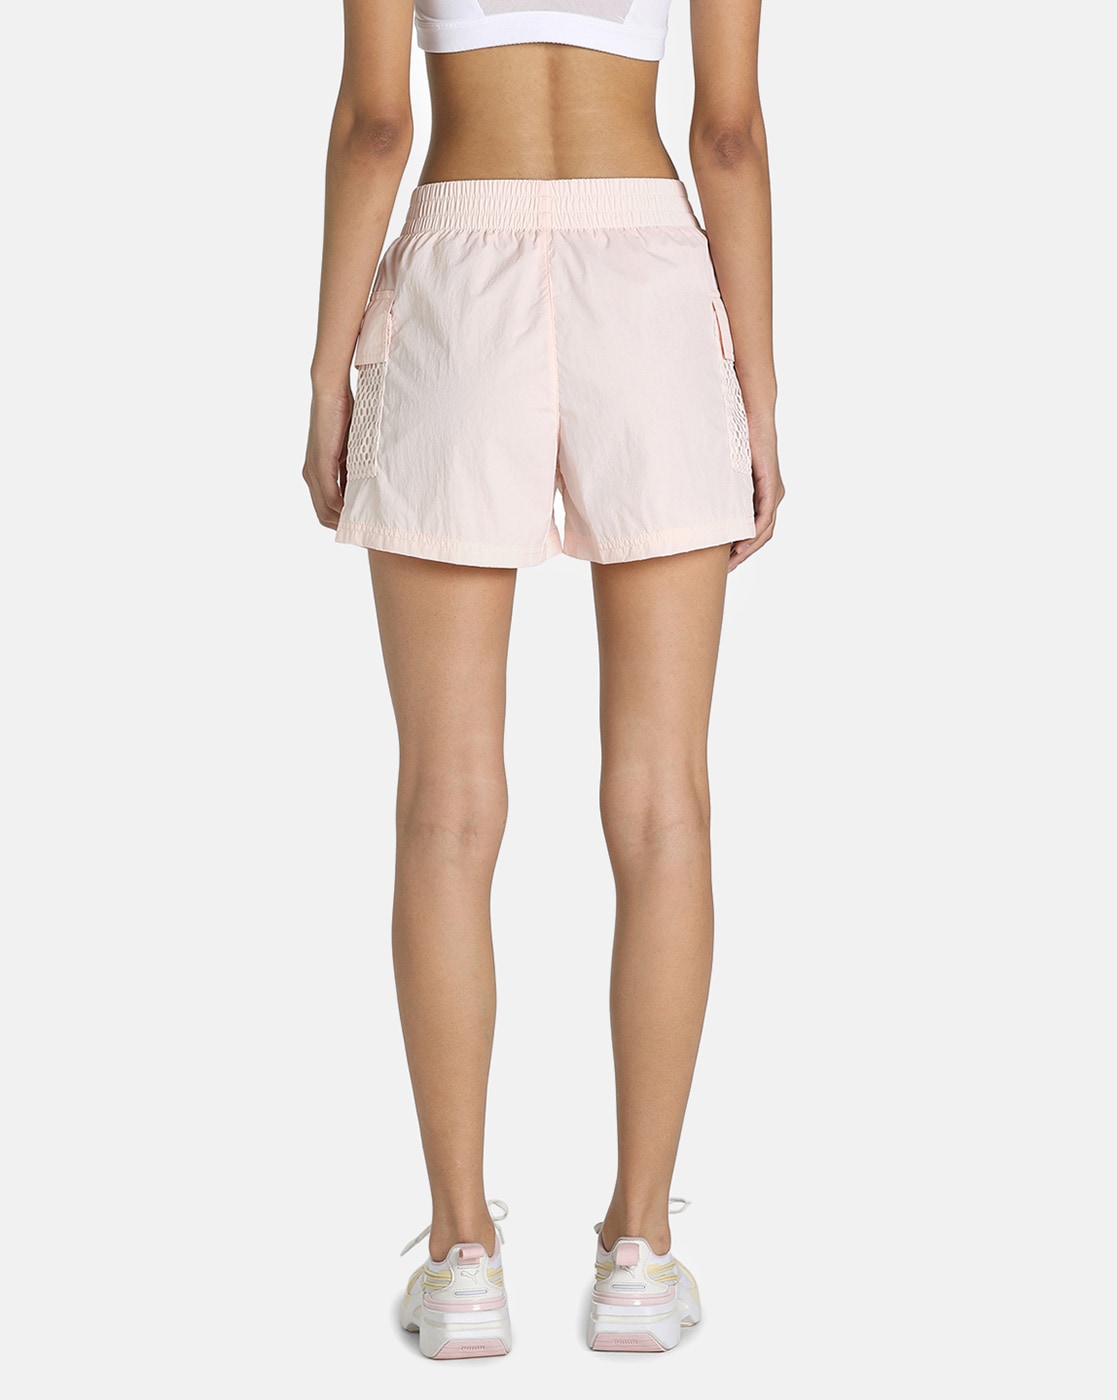 Buy pink Shorts for Women by Puma Online